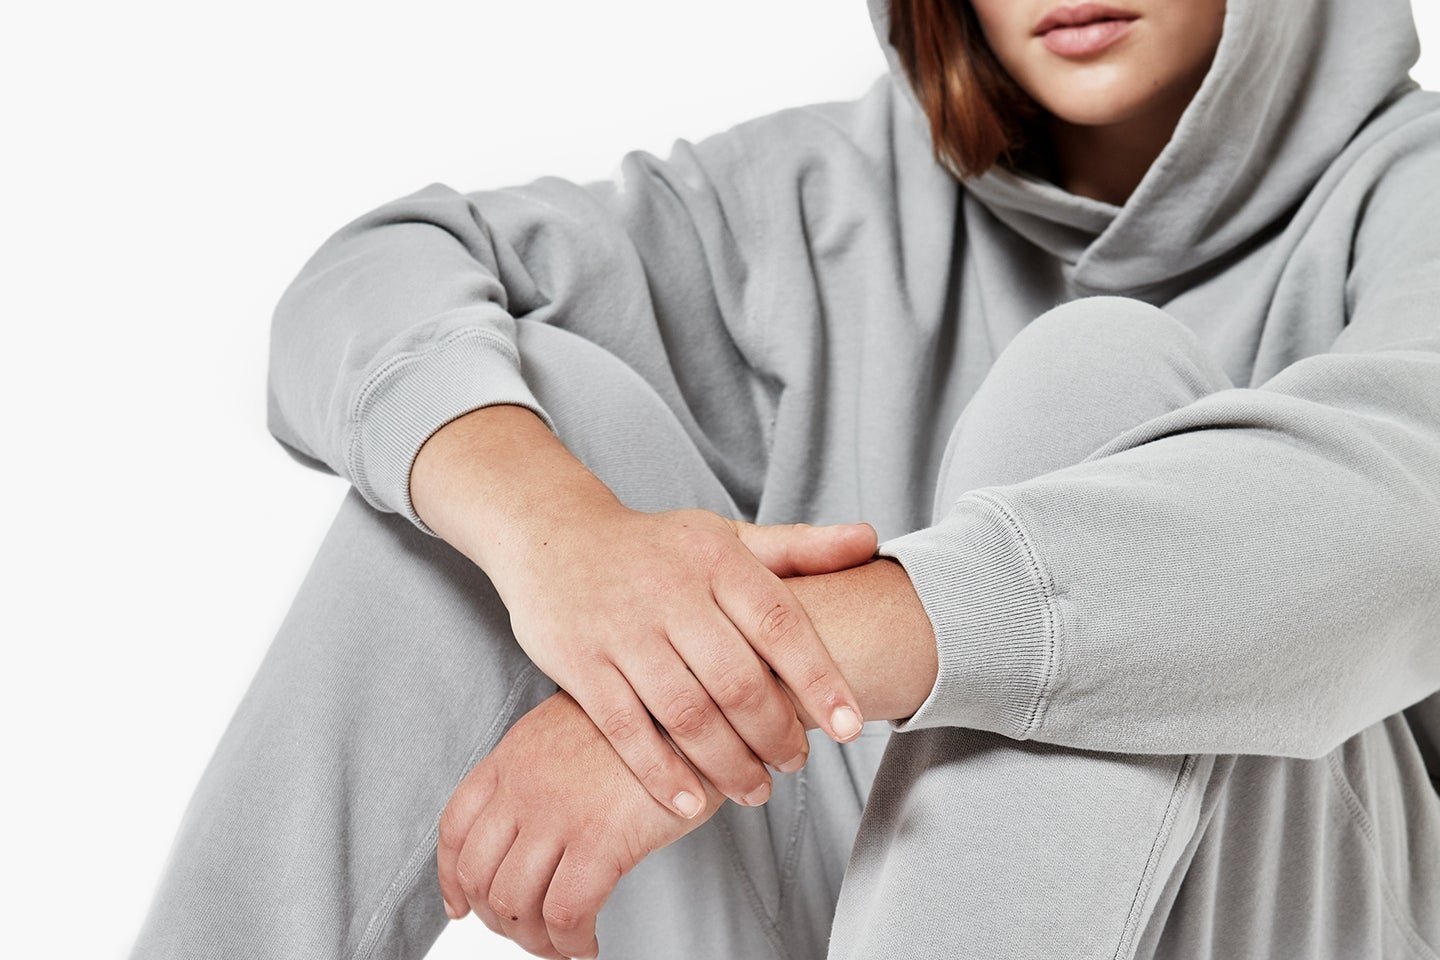 The 12 Must-Have Pieces Of Loungewear If You Hate Almost Everything Lately  — The Candidly